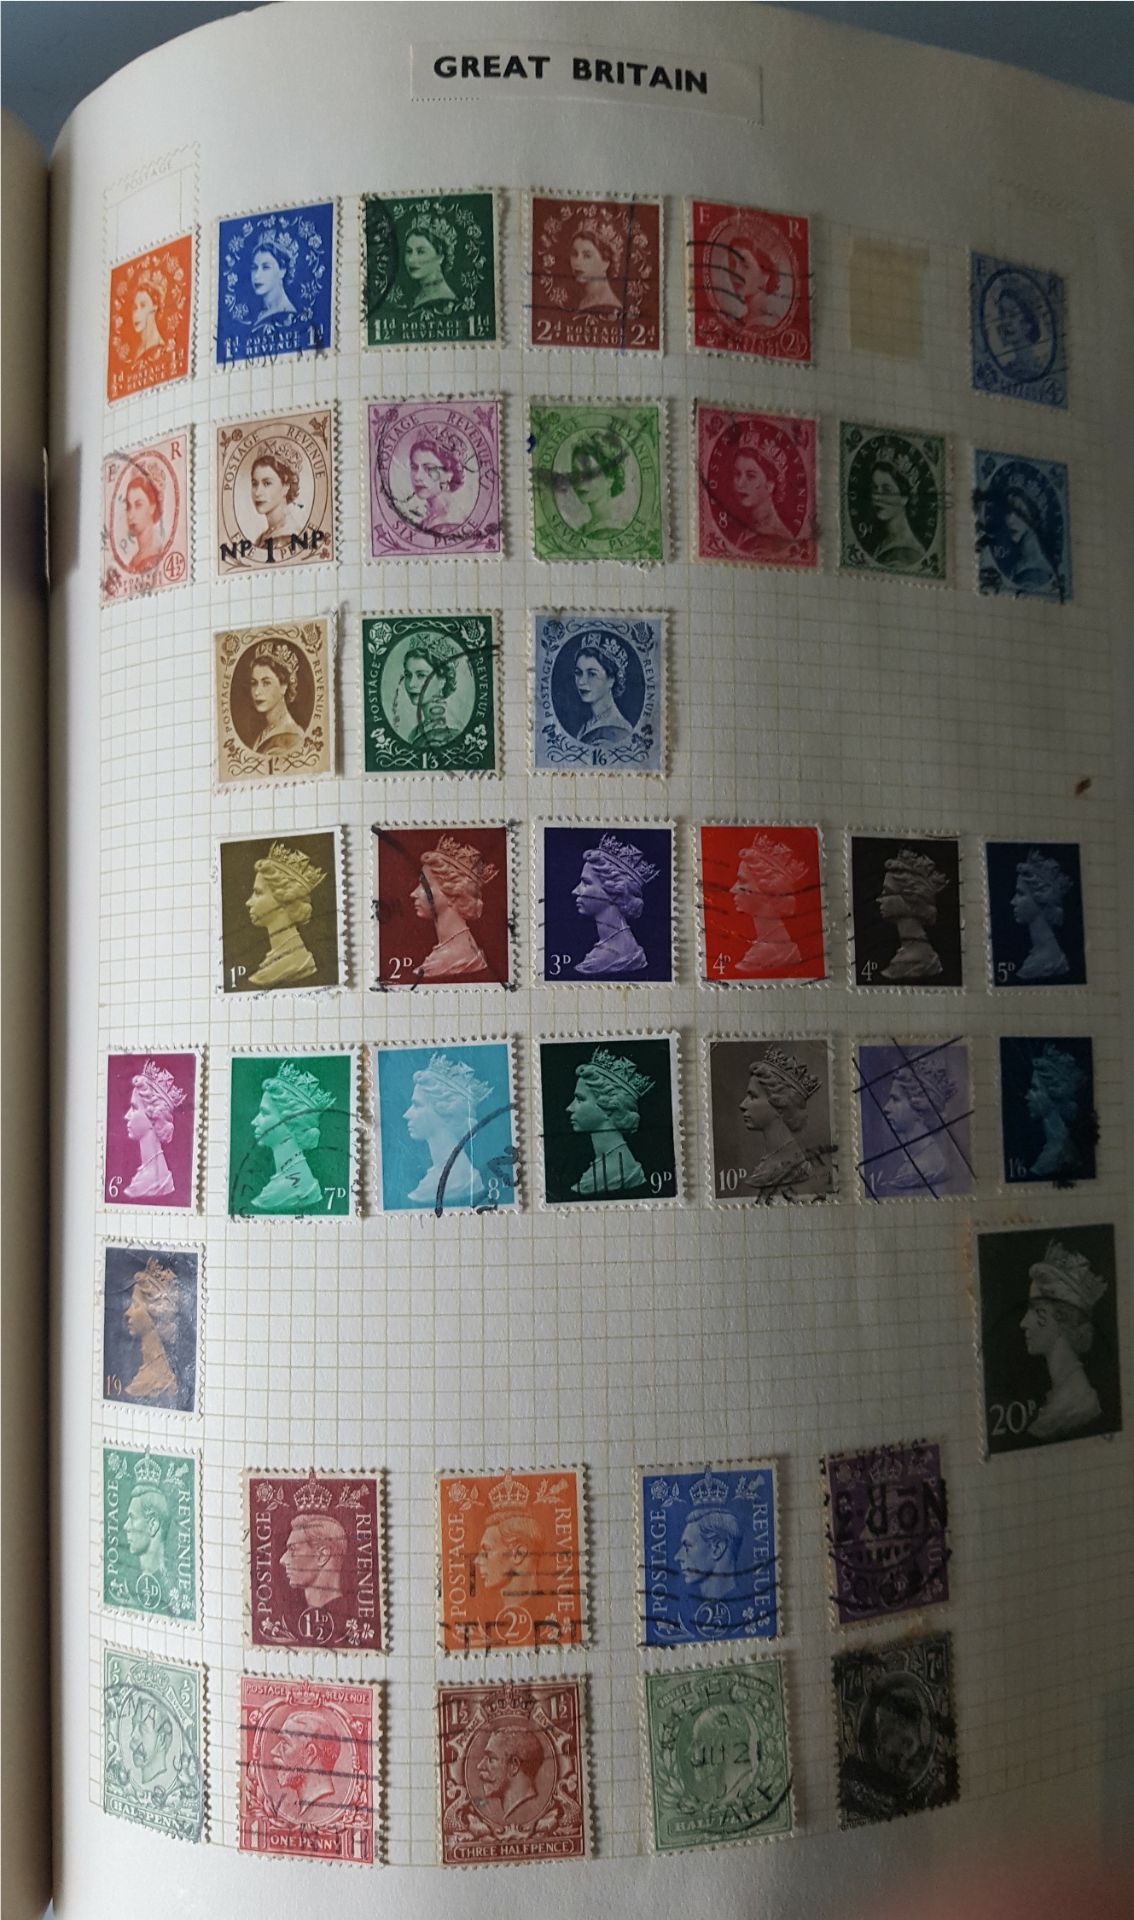 Vintage Retro Concord Stamp Album British, Commonwealth & World Stamps Over 500 Stamps - Image 6 of 11